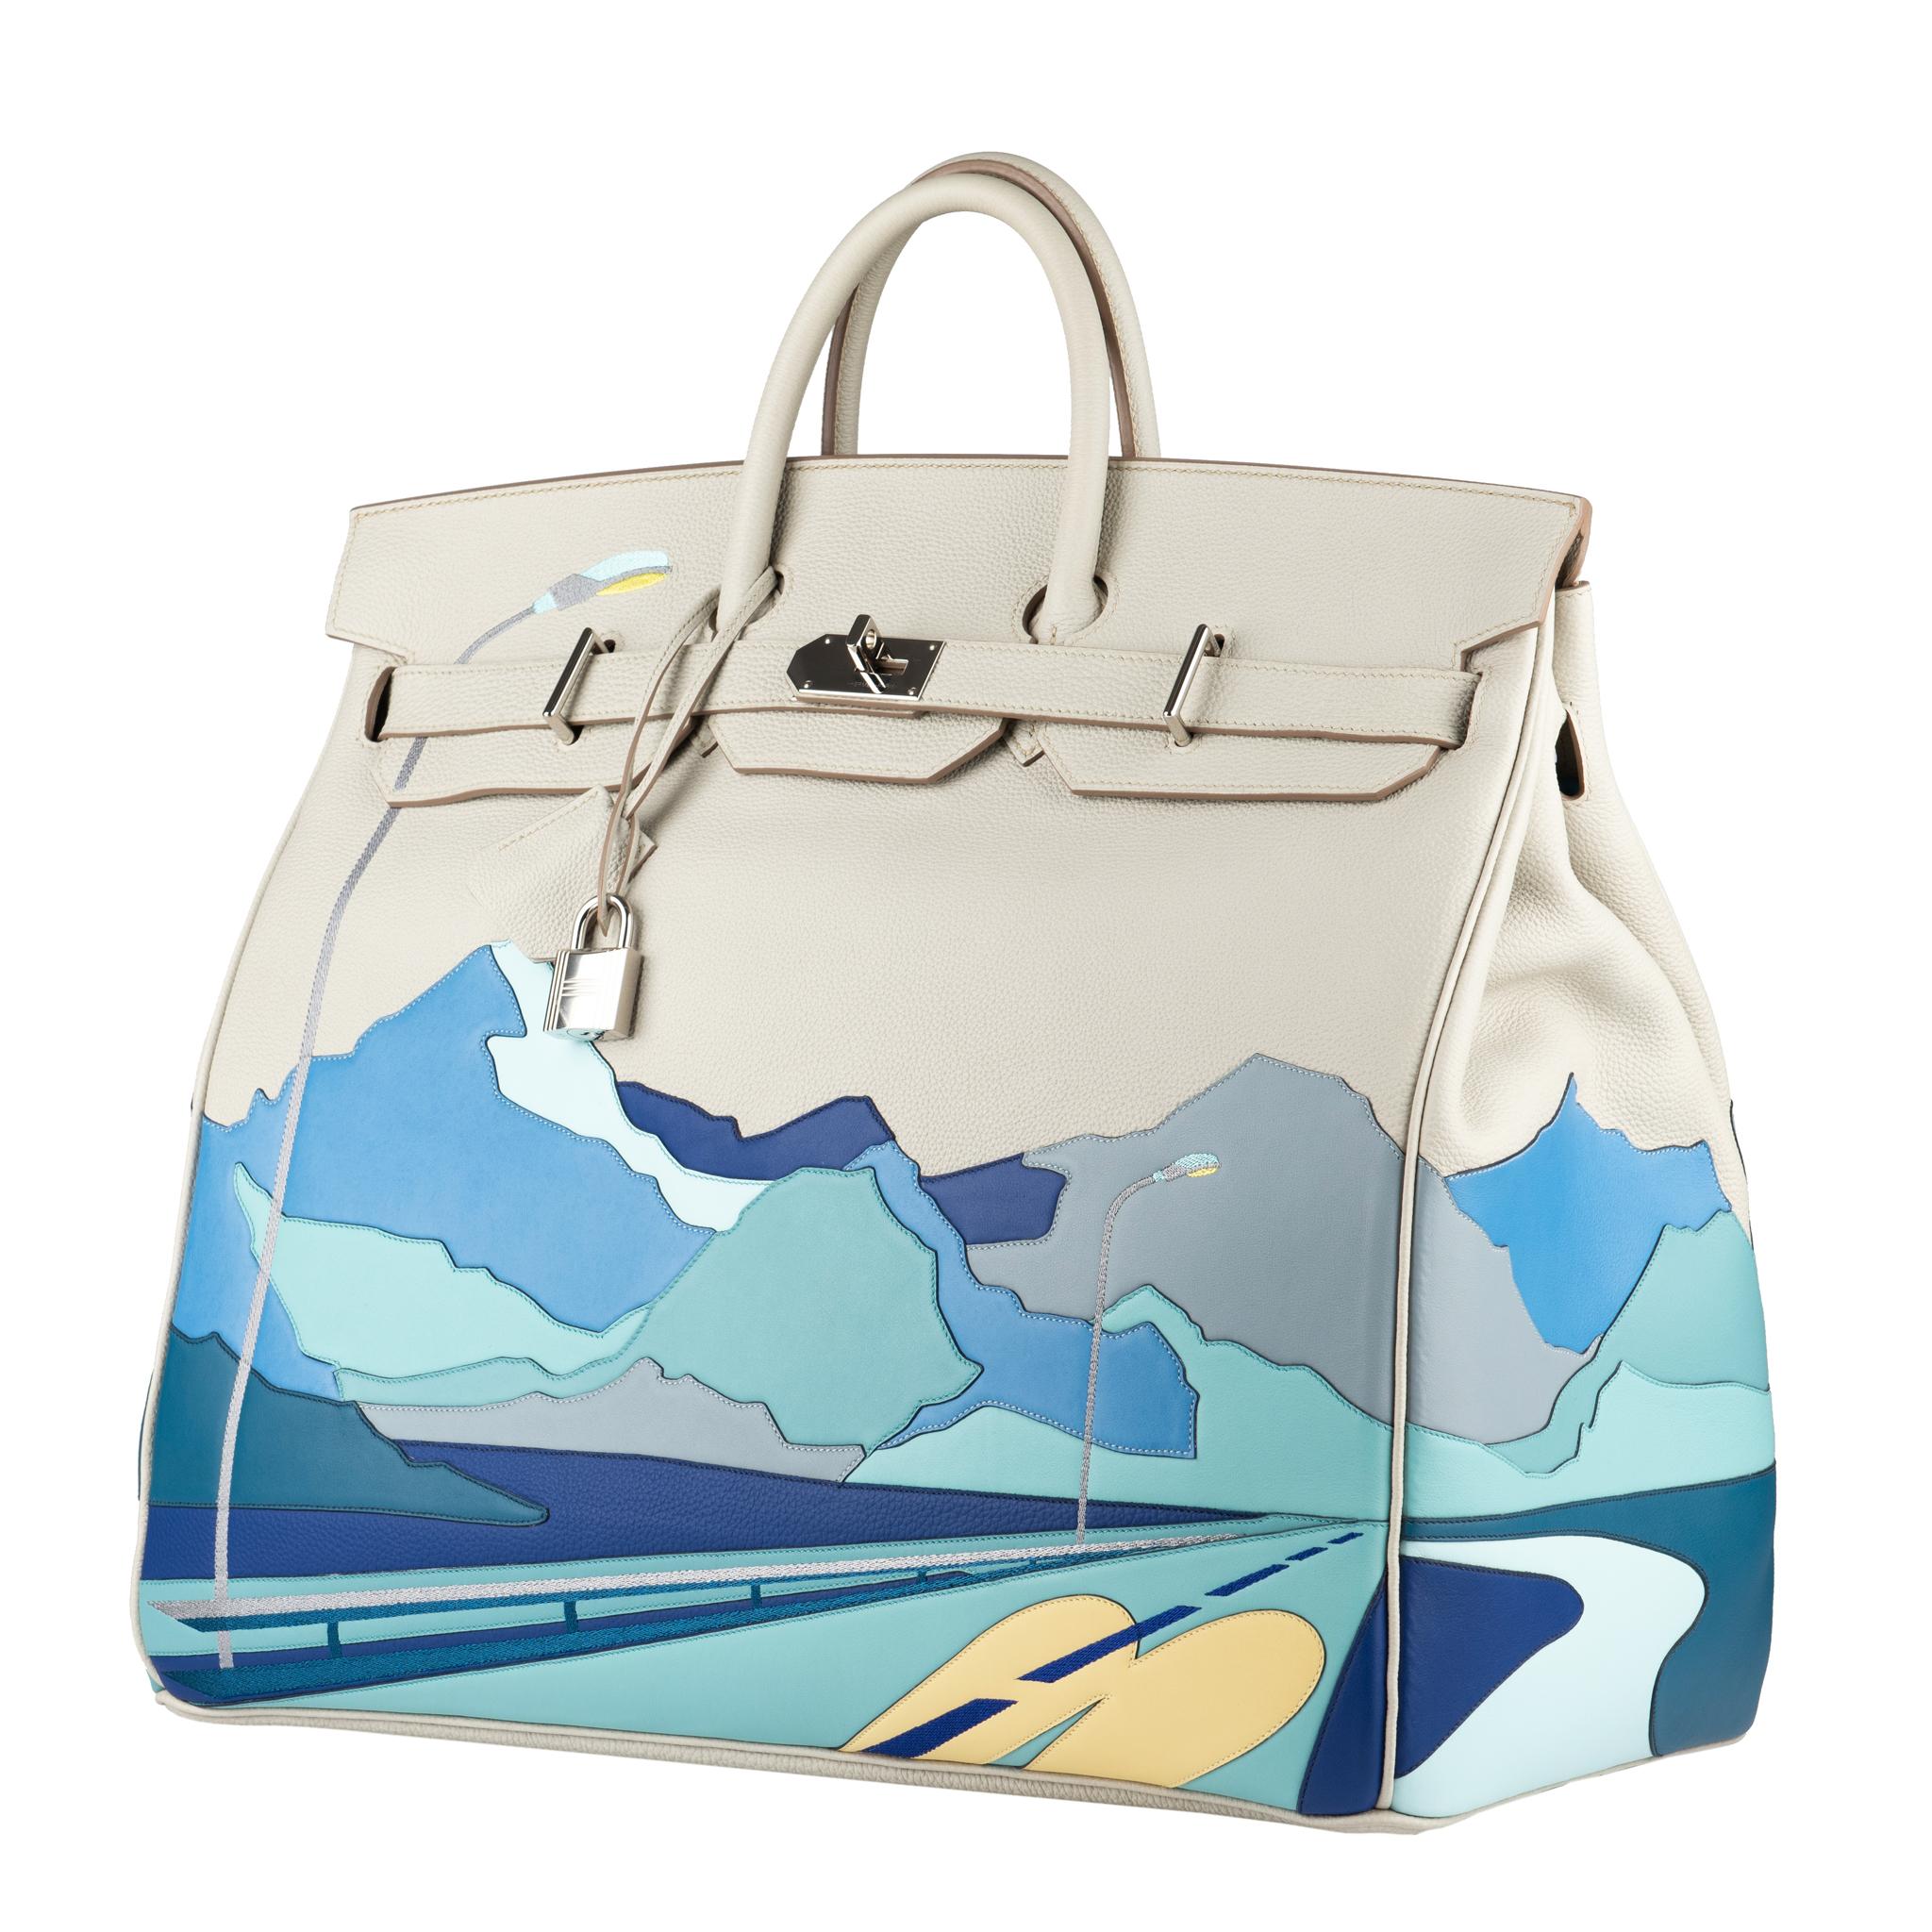 1stdibs Exclusives From Three Over Six

Brand: Hermès 
Size: Haut à Courroies 50cm “Endless Roads”
Color: Gris Perle and multi-tone patchwork leather with silver-tone embroidery
Leather: Togo and Swift
Hardware: Palladium  
Stamp: 2020 D
Condition: